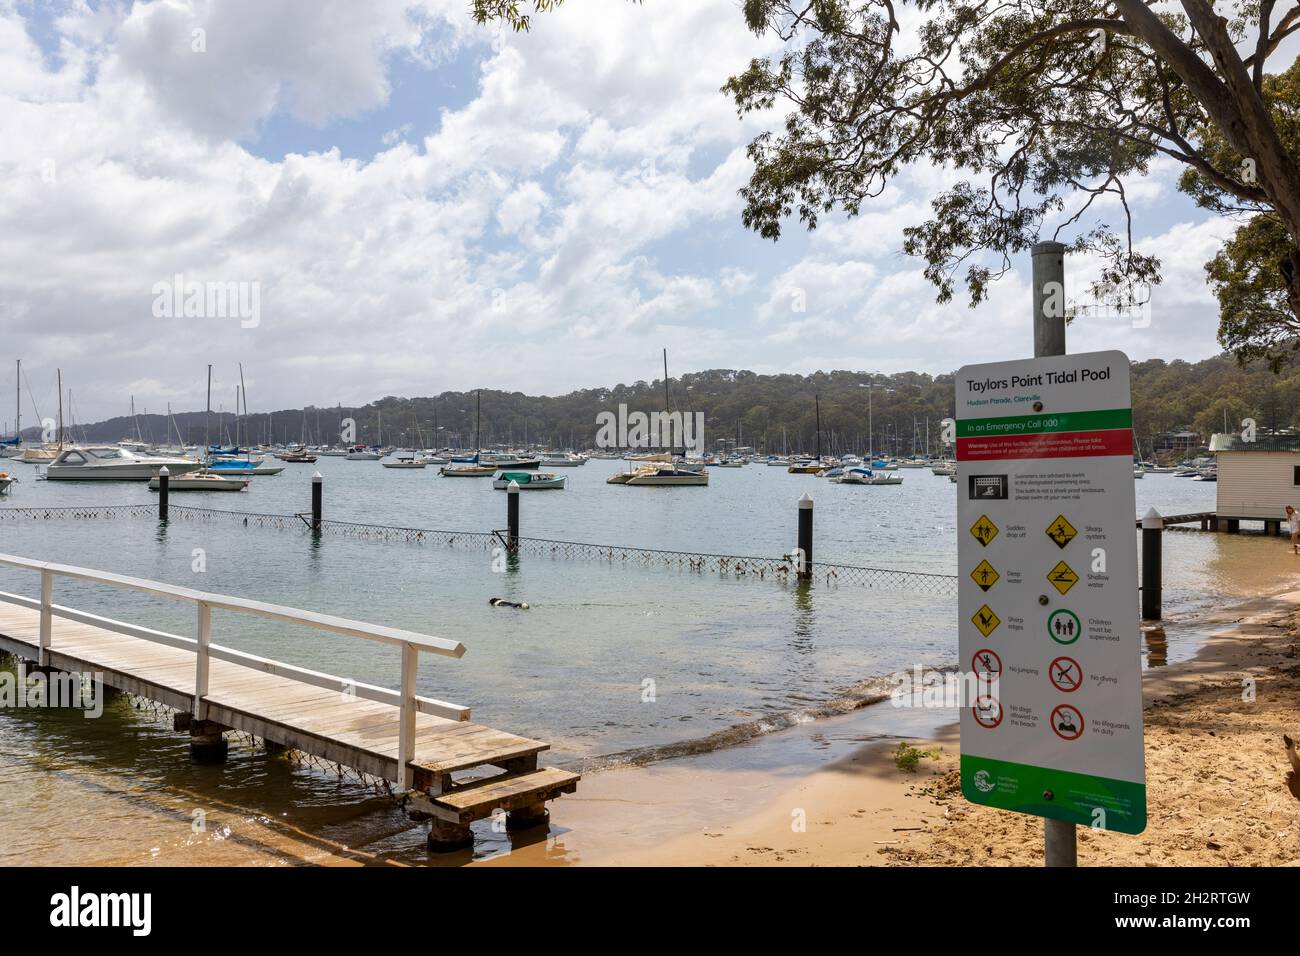 Clareville,Sydney suburb located on the shores of Pittwater, with swimming tidal pool and jetty area,Sydney,Australia Stock Photo